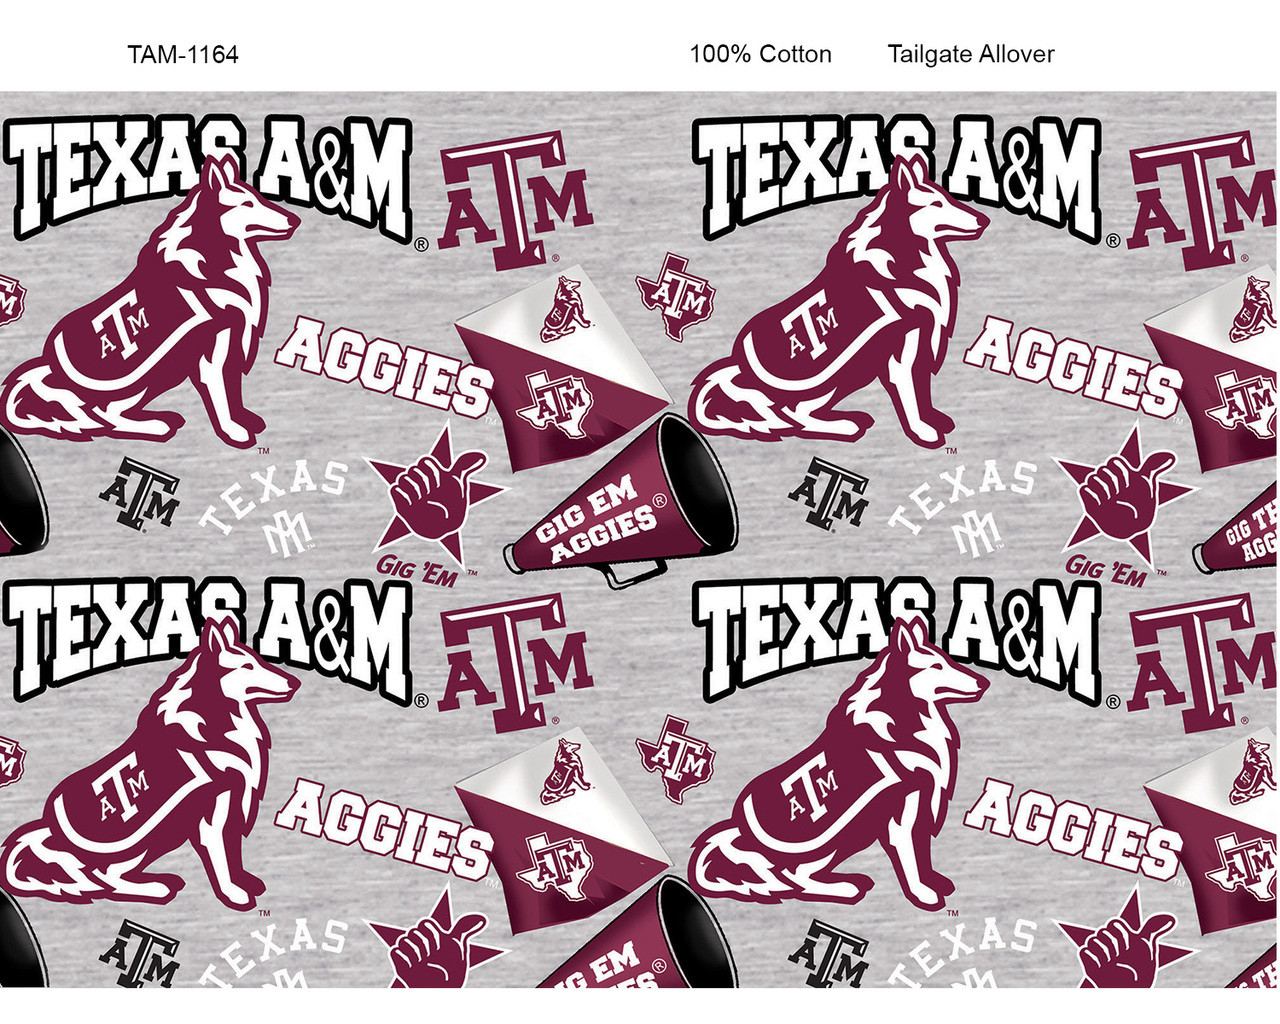 Texas A&M Aggies Cotton Fabric with Mascot Heather Print or Matching Solid Cotton Fabrics